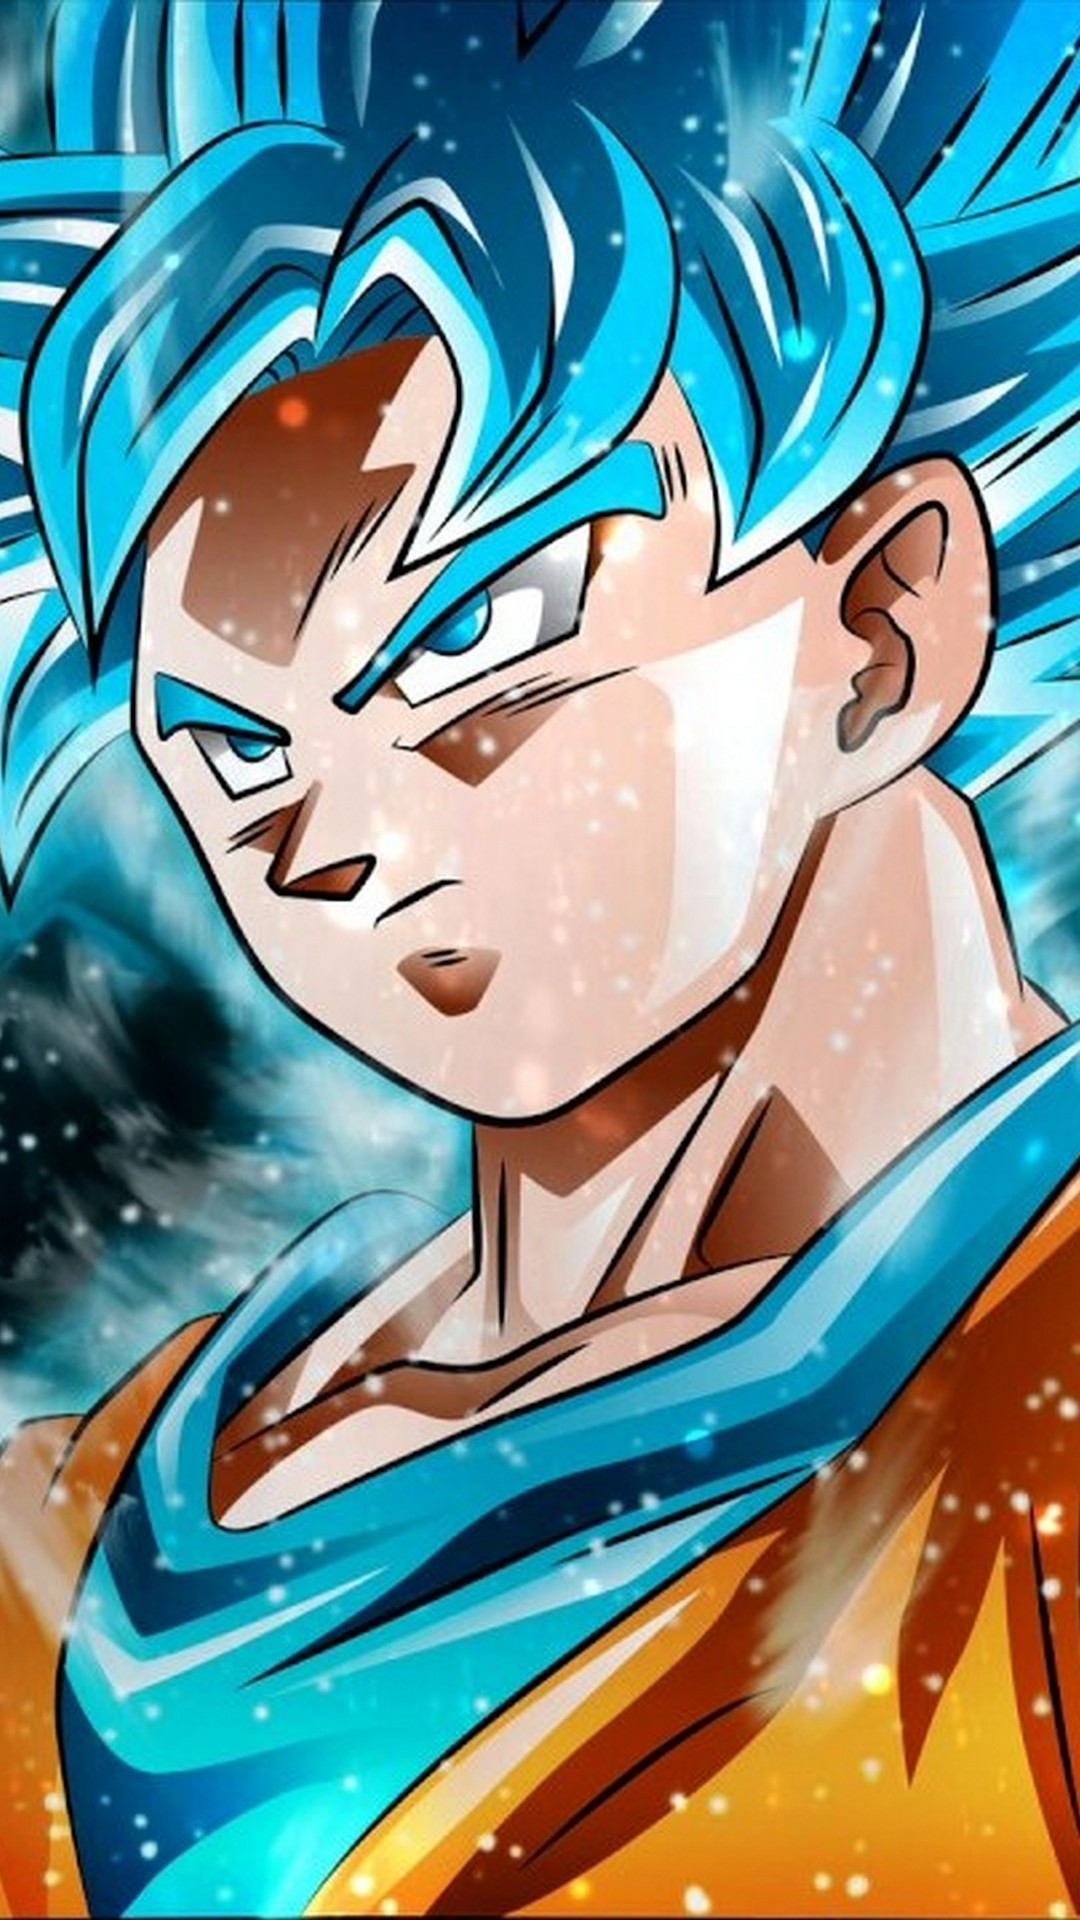 Goku SSJ Wallpaper Mobile with high-resolution 1080x1920 pixel. You can use and set as wallpaper for Notebook Screensavers, Mac Wallpapers, Mobile Home Screen, iPhone or Android Phones Lock Screen